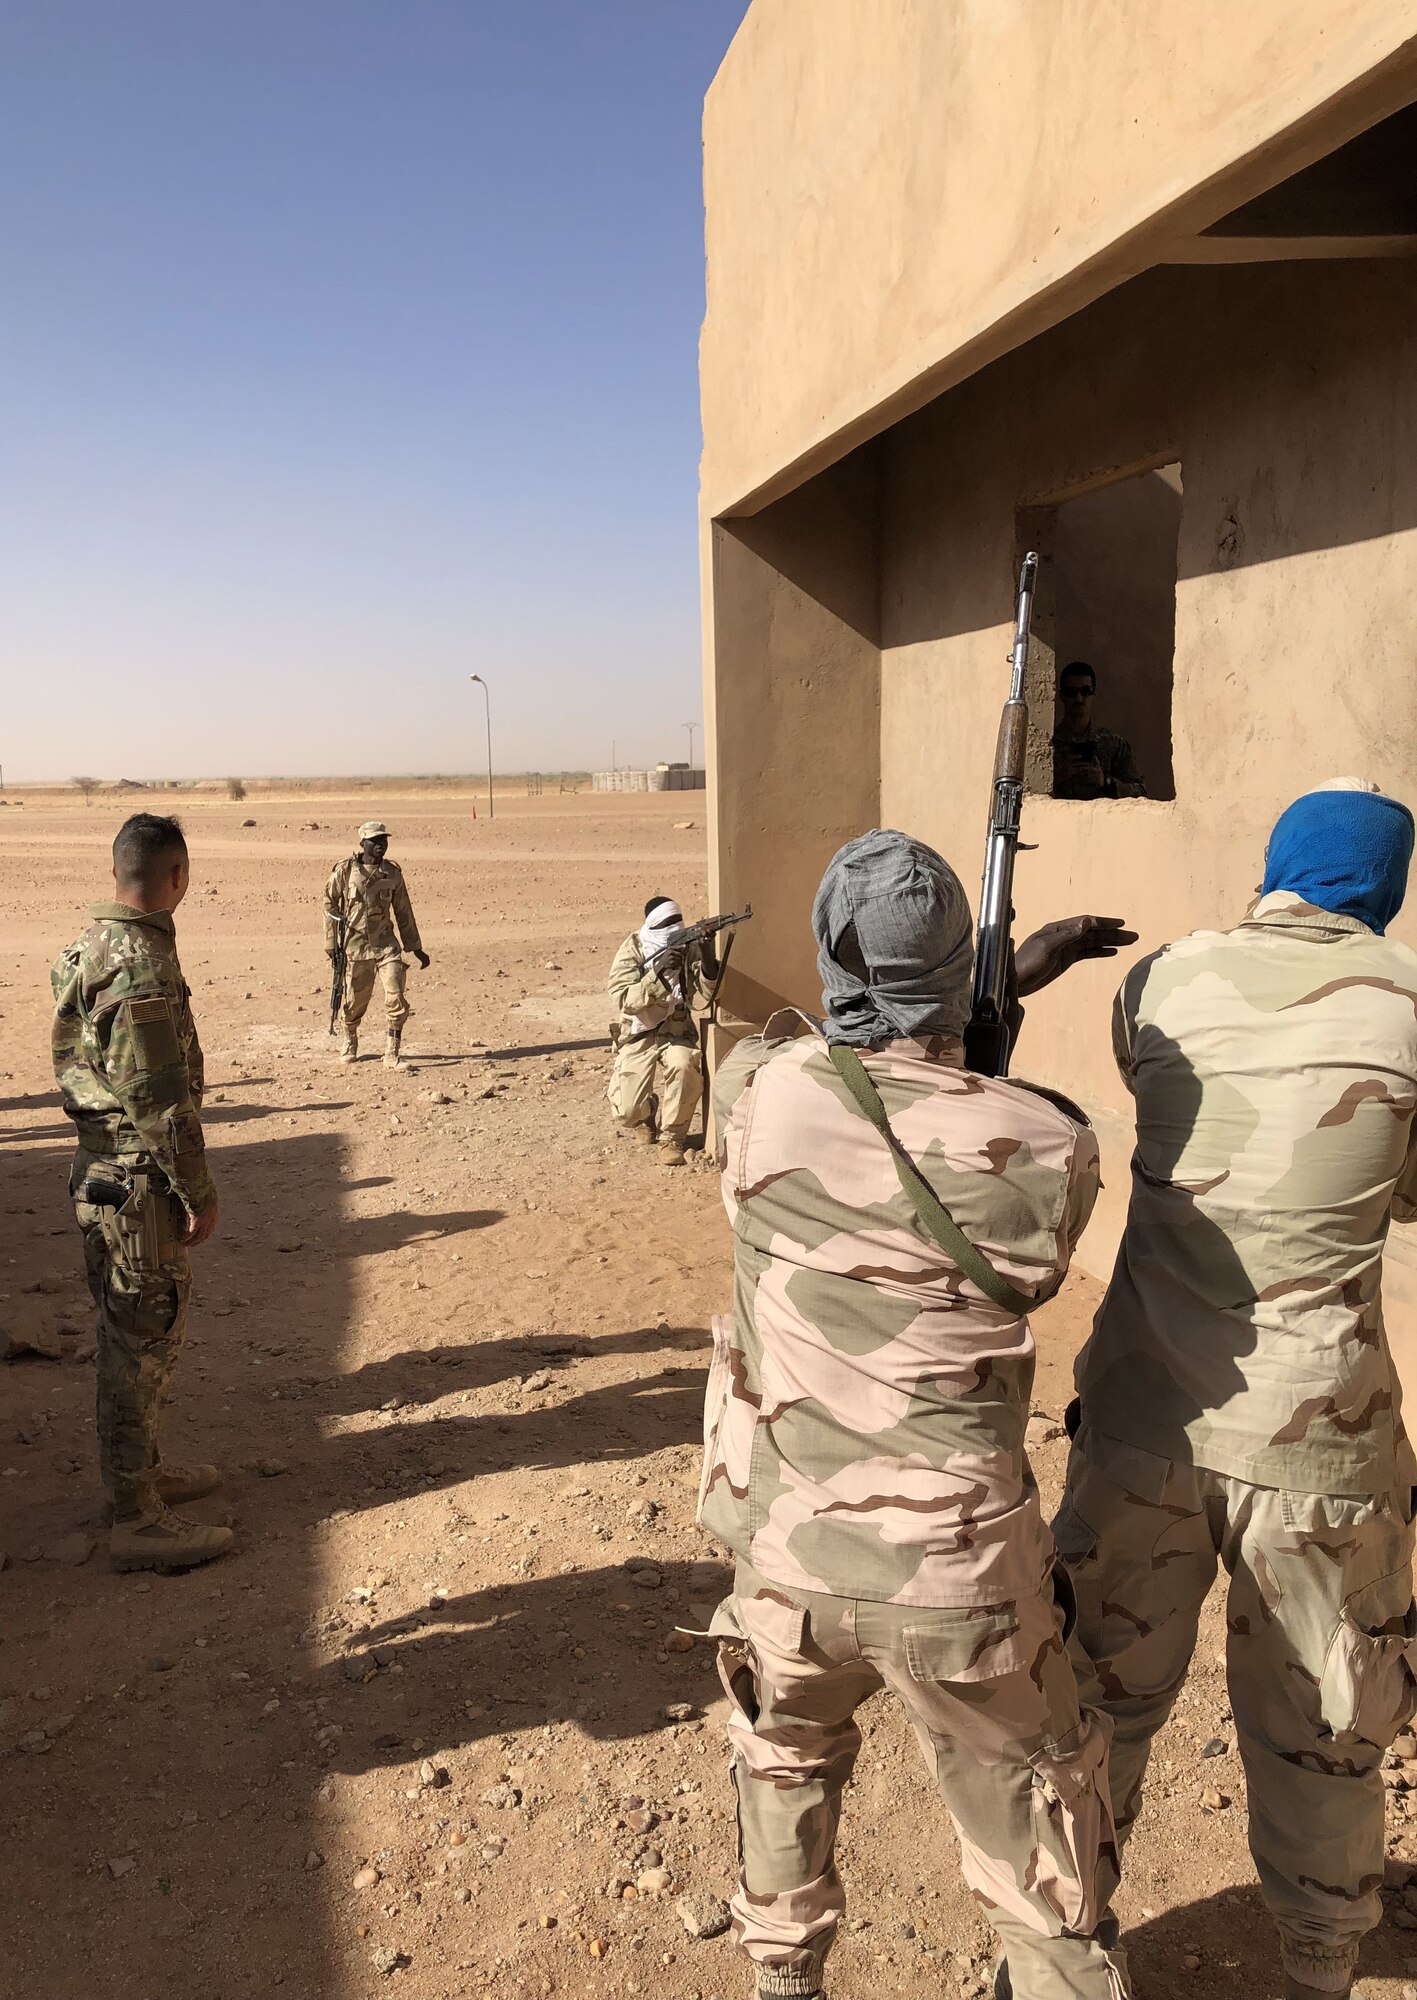 Nigerien Armed Forces (French language: Forces Armées Nigeriennes) members, practice close-quarters battle techniques taught by the 409th Expeditionary Security Forces Squadron air advisors at Nigerien Air Base 201, Agadez, Niger, Feb. 3, 2022. The 409th ESFS hosted an eight-week course to train the FAN on various tactics such as combat lifesaving skills, weapon maneuvers, vehicle searches and patrol movements to counter the escalating violent extremism in the tri-border region of Niger, Burkina Faso, and Mali. (U.S. Air Force courtesy photo by Capt. Keith Richards)